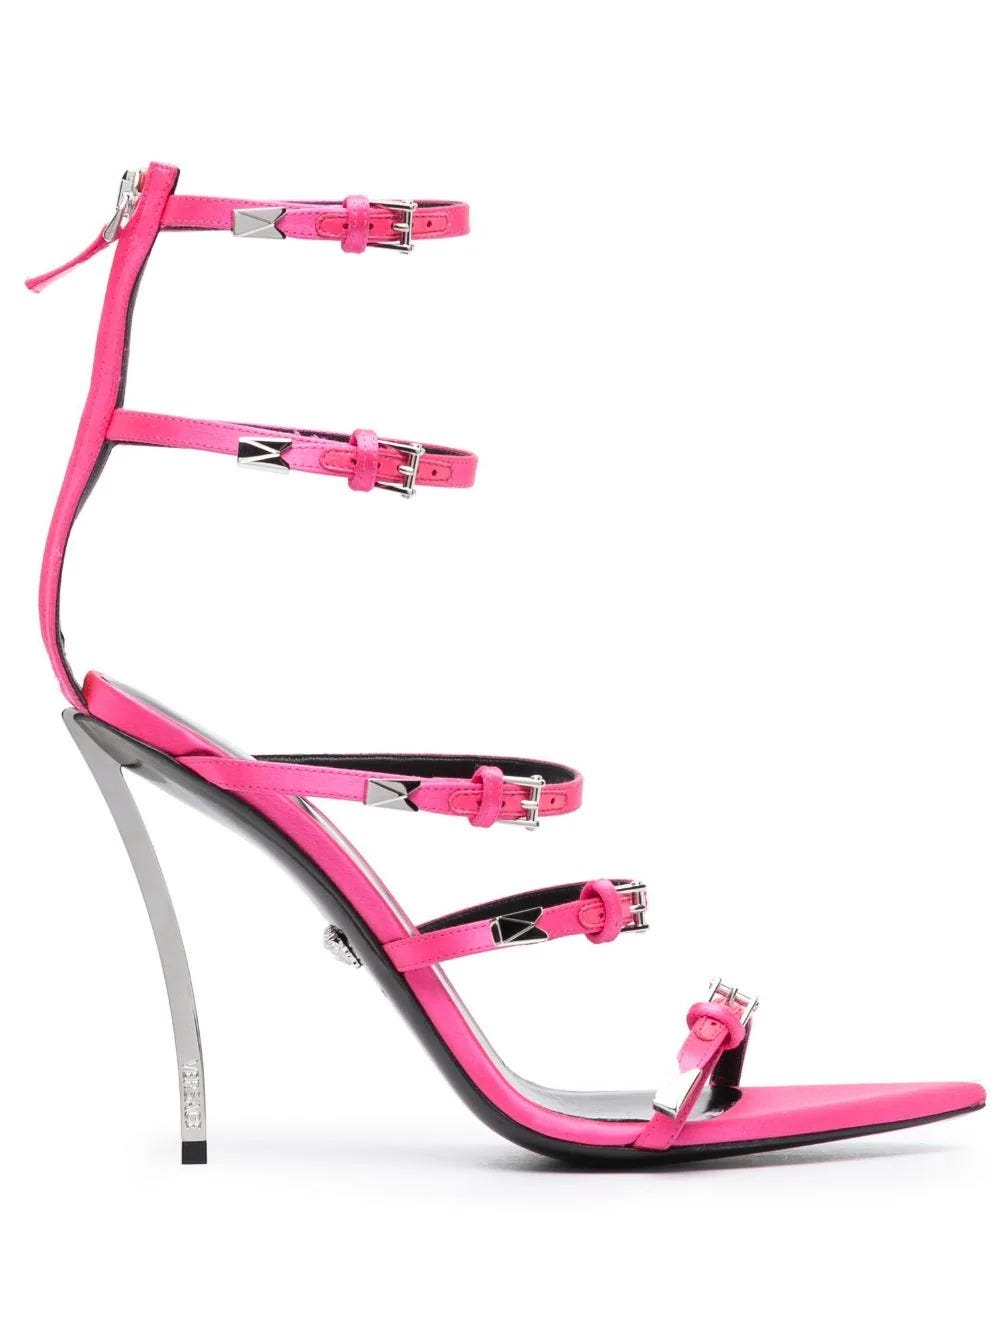 VERSACE PINK PIN-POINT SANDALS